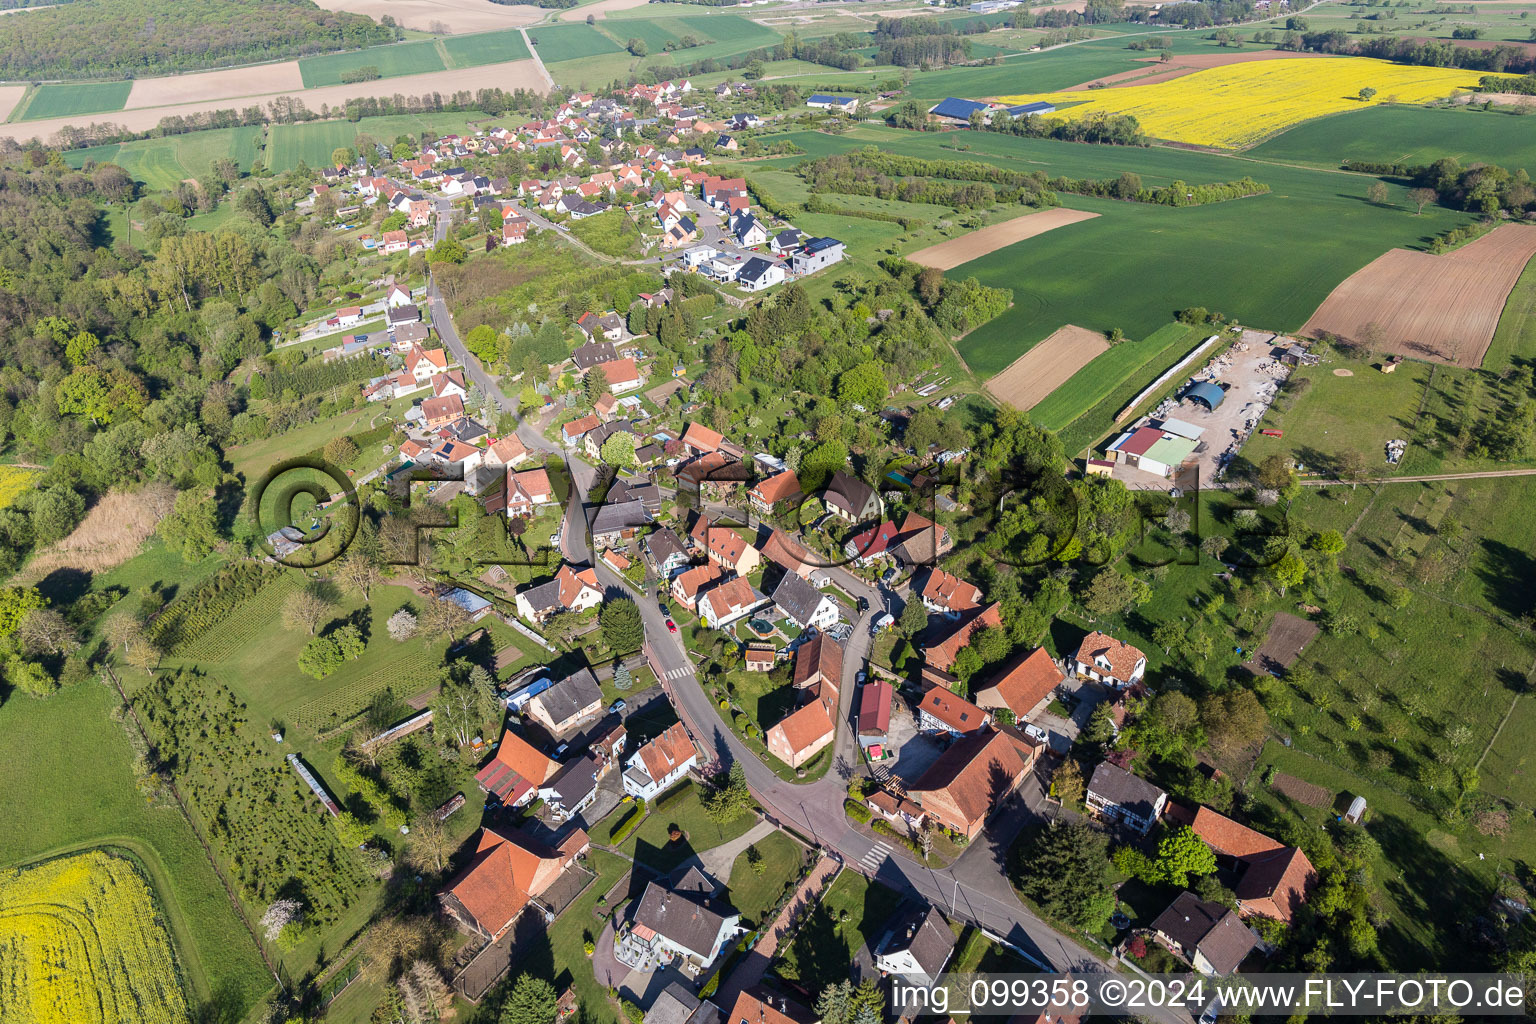 Village - view on the edge of agricultural fields and farmland in Gunstett in Grand Est, France